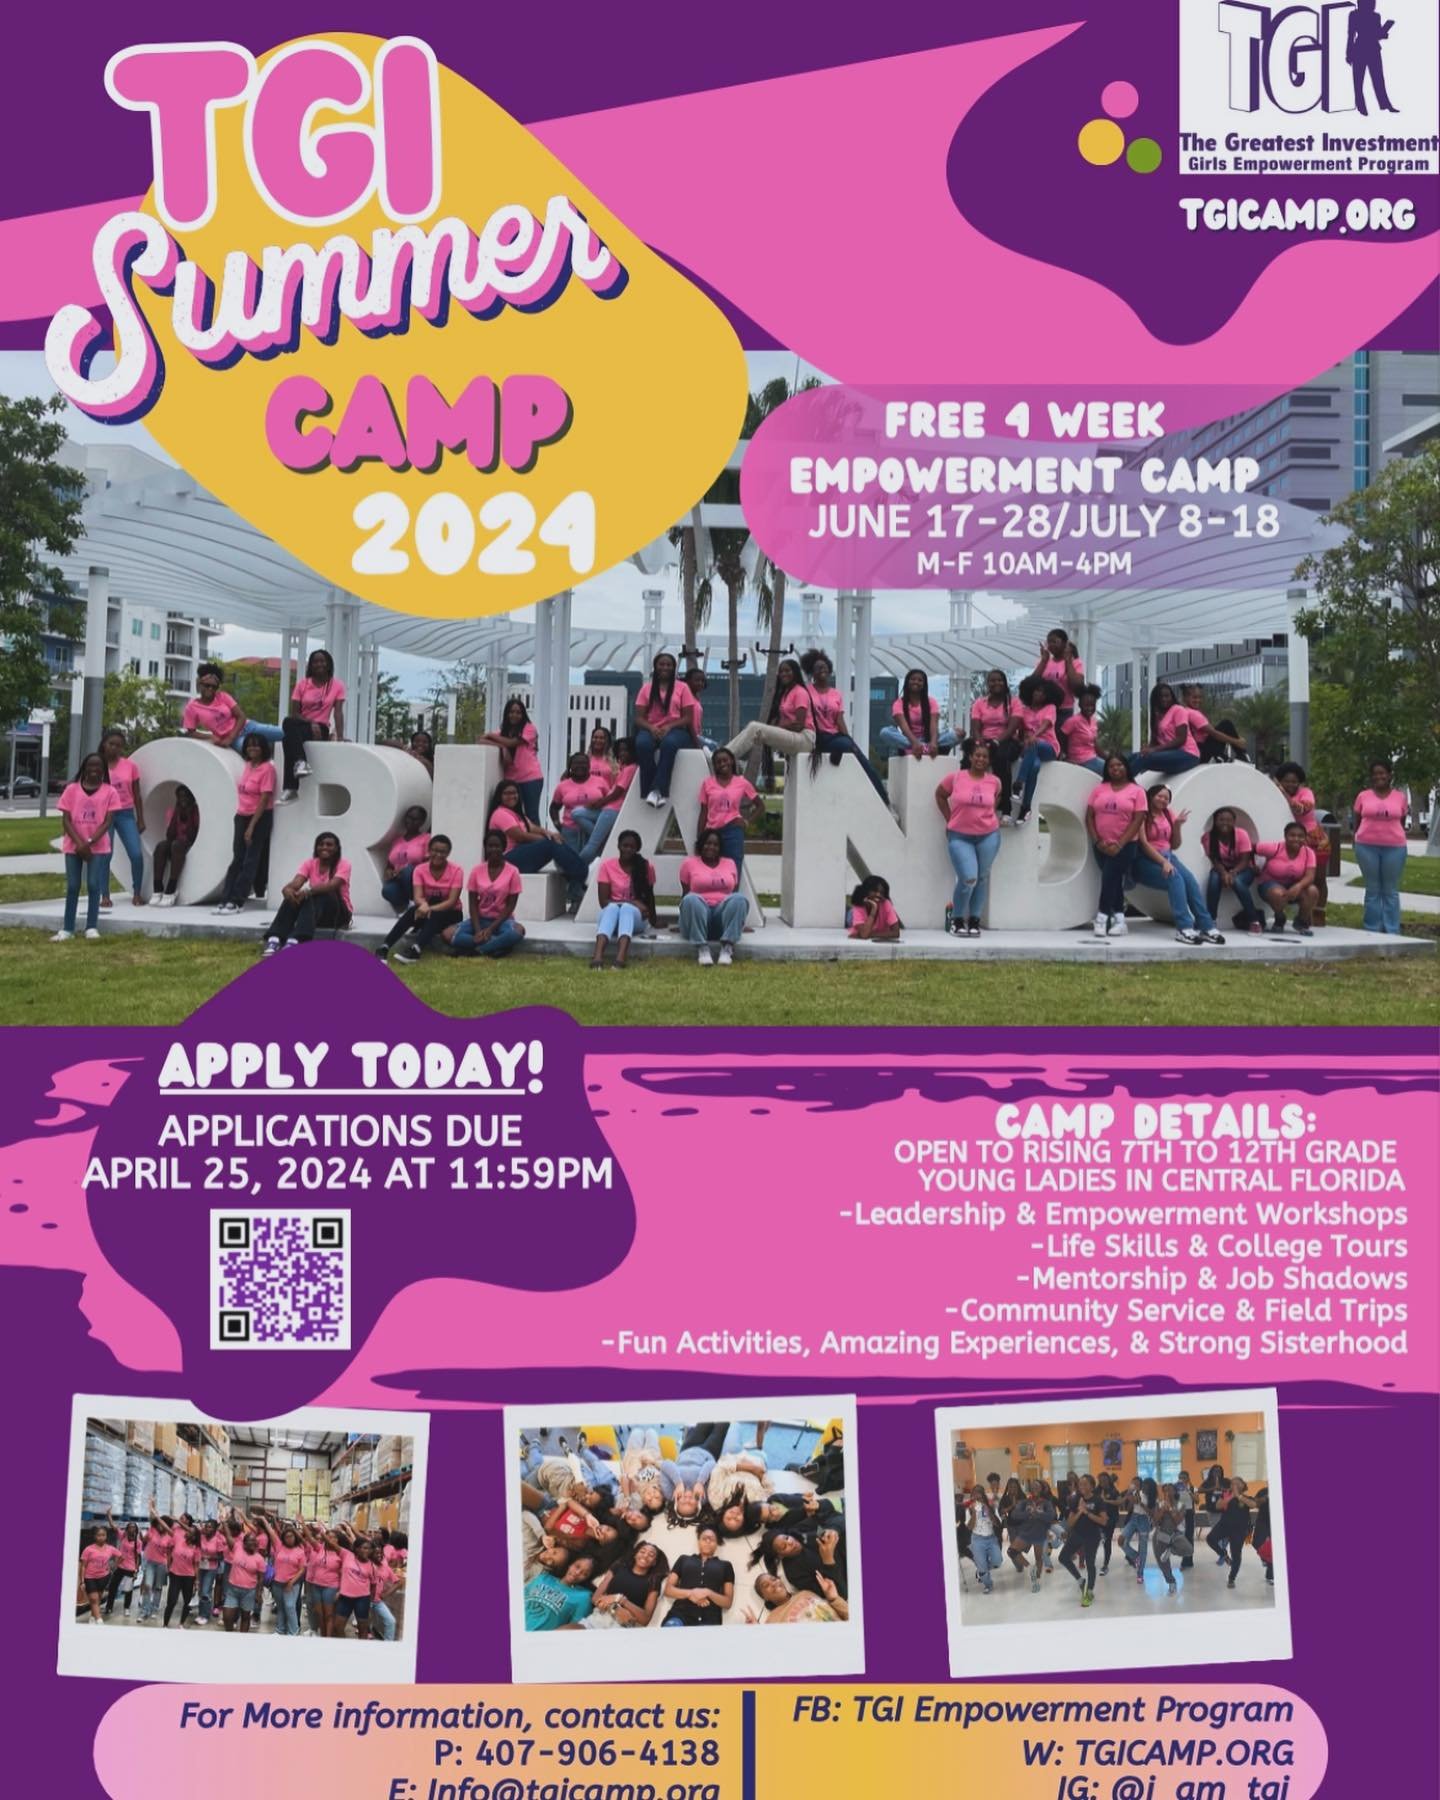 The TGI 2024 Summer Camp Application is available online at www.tgicamp.org. The application is also available in our bio. 

Apply Today! We want all FUTURE FEMALE LEADERS to apply. Applications are due April 25, 2024 at 11:59 pm. If you know any mid